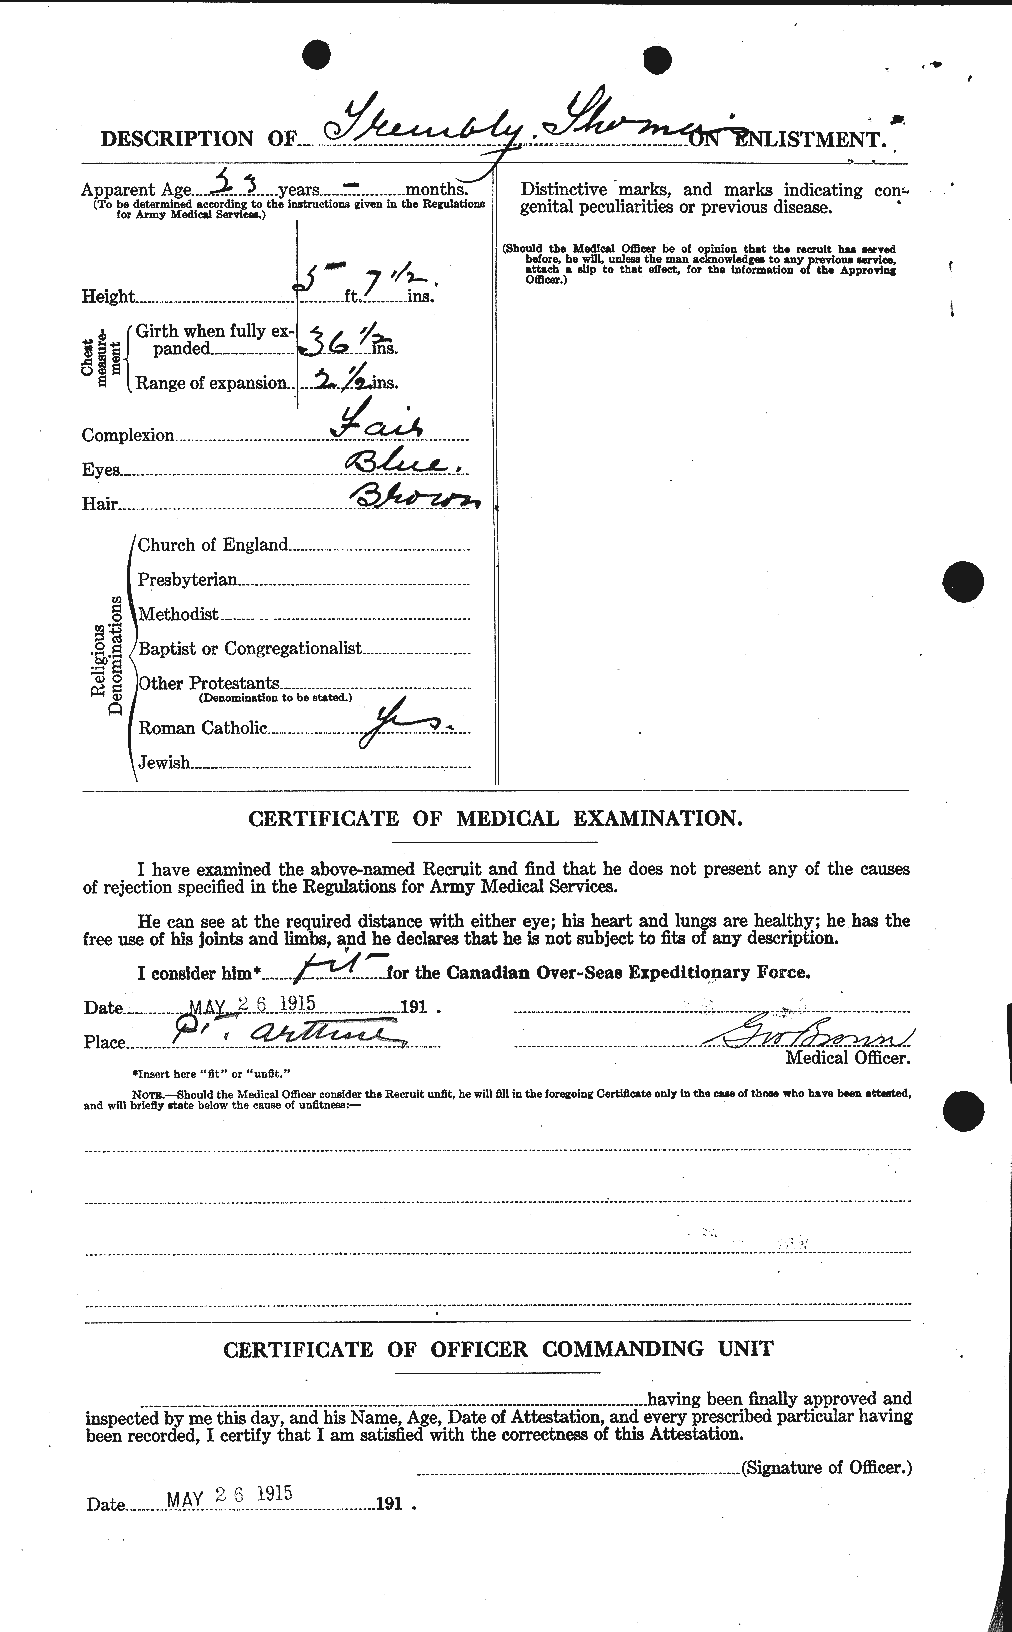 Personnel Records of the First World War - CEF 638317b